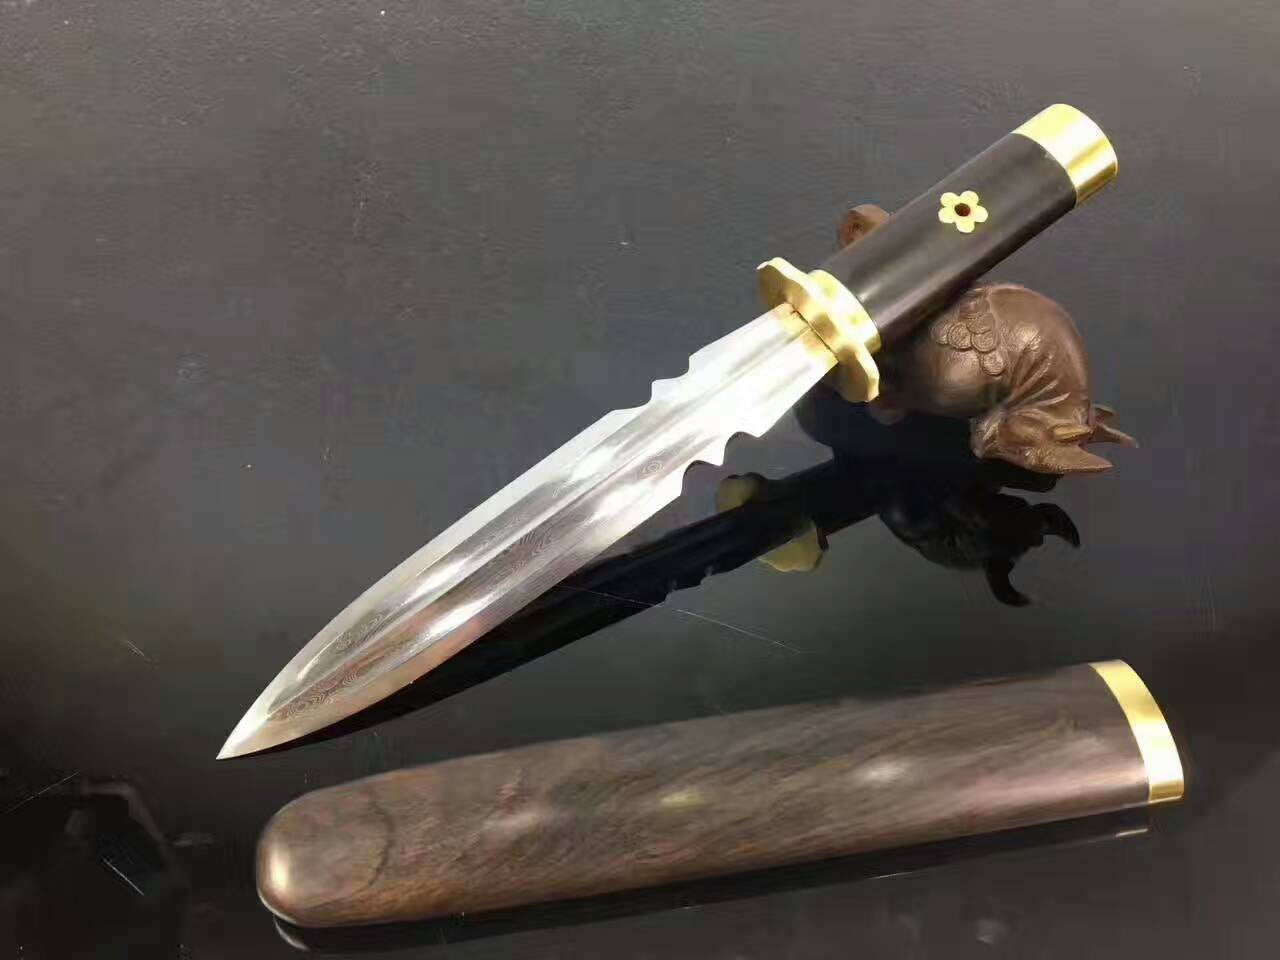 Small chinese sword,Dagger(Pattern steel blade,Ebony scabbard,Brass fitting)Full tang,Length 11.8" - Chinese sword shop